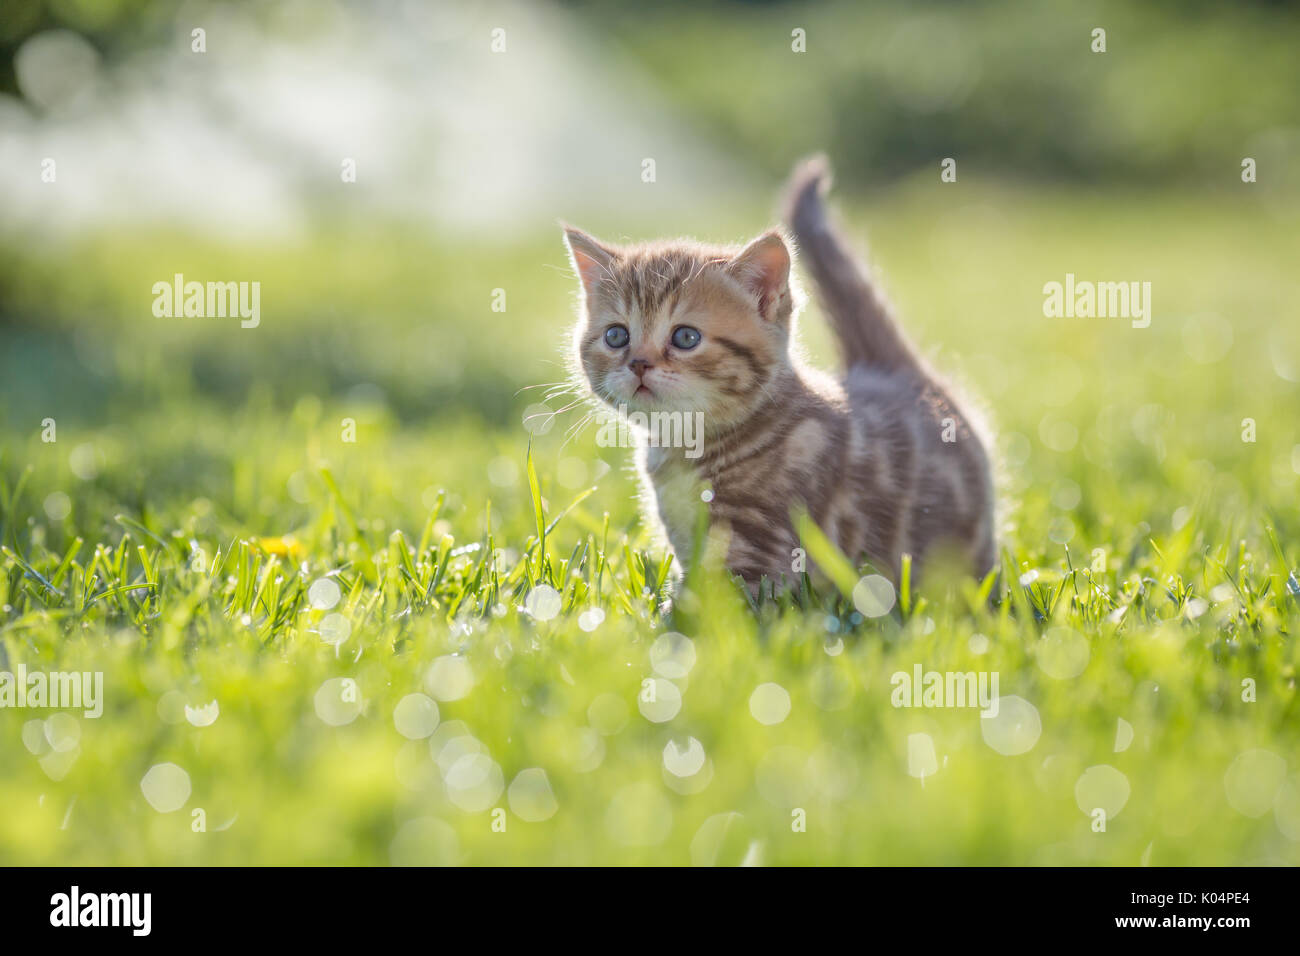 Funny cat standing in green grass Stock Photo